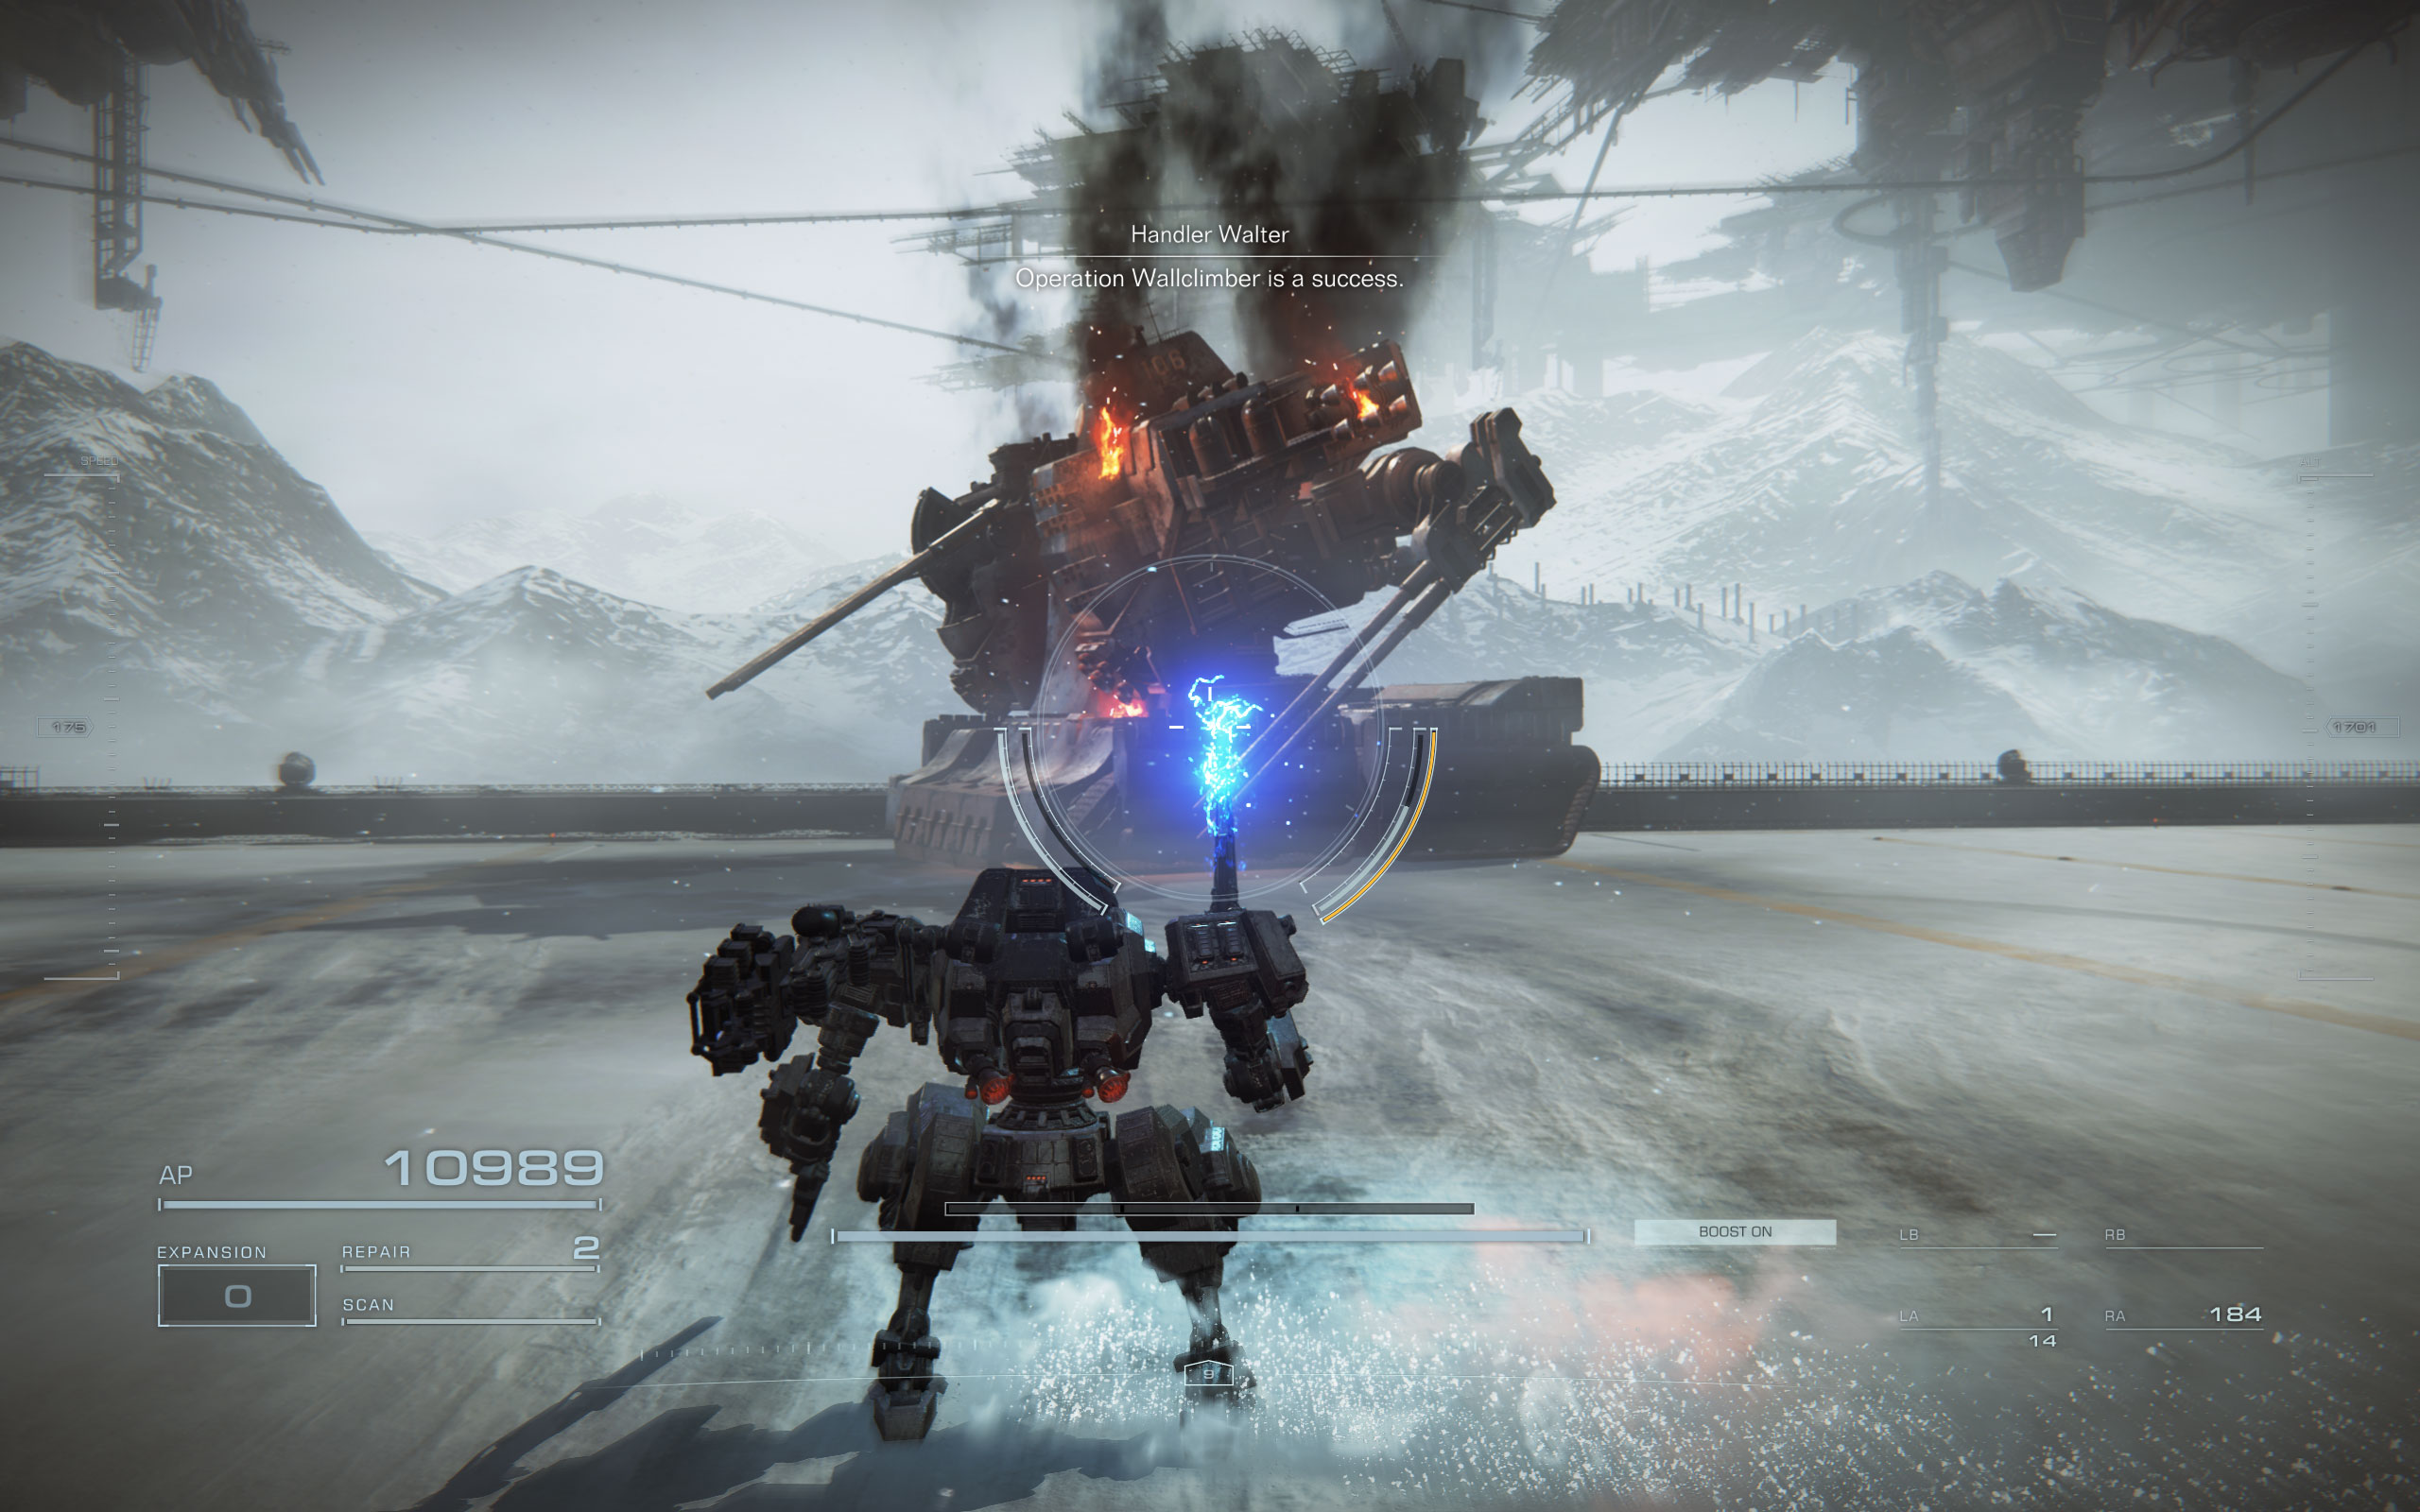 Armored Core VI Fires of Rubicon Benchmark Test & Performance